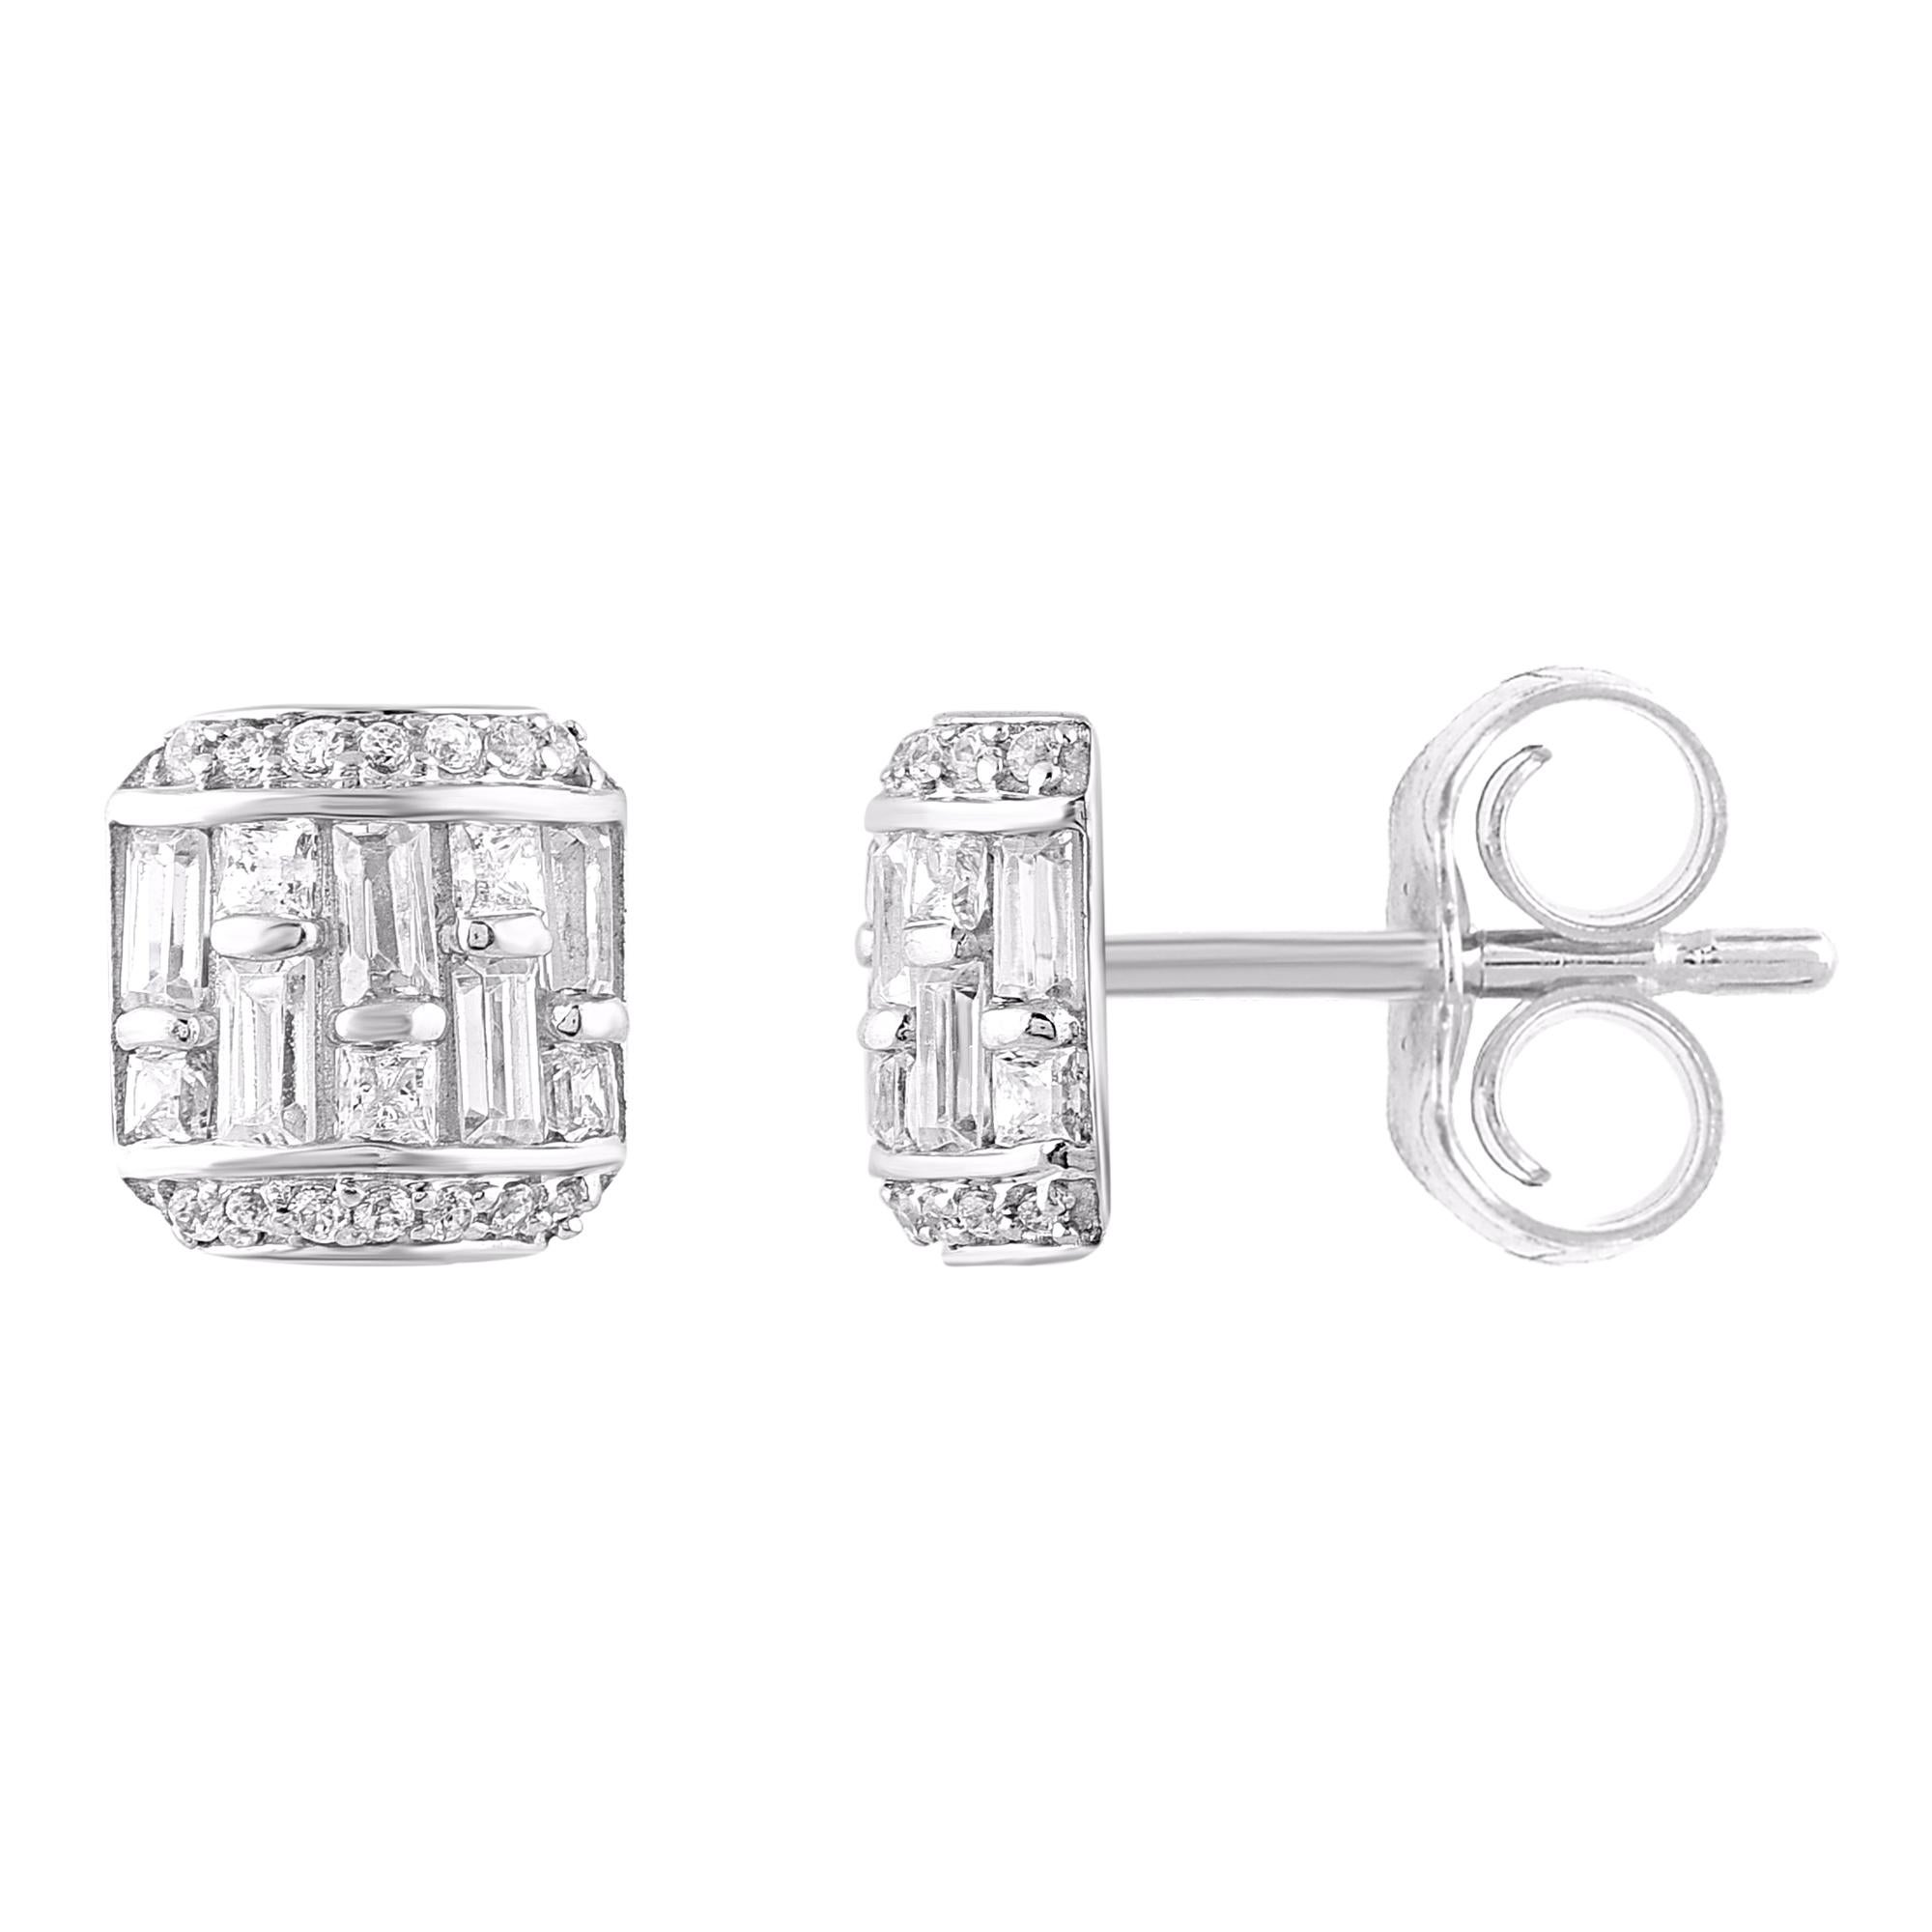 Expertly crafted in 14K solid white gold, cushion frame shaped earring is cleverly filled with 28 round-cut, 10 baguette-cut and 10 princess-cut diamond set in pave and channel setting, shines with H-I color I2 clarity. Captivating with 0.50 carats